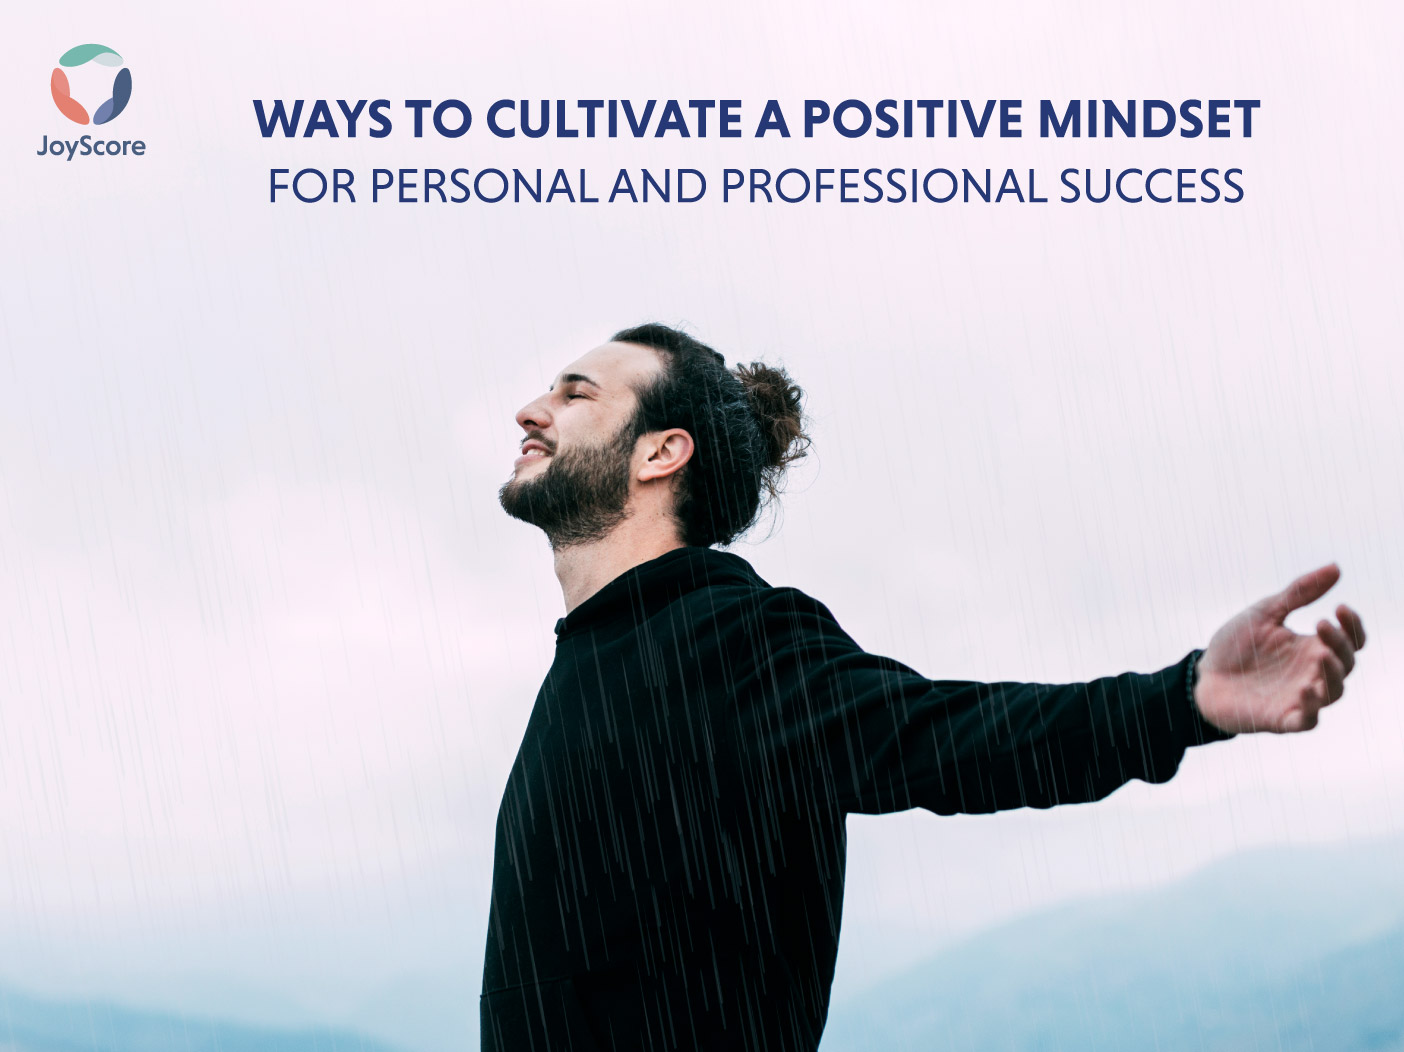 6 EFFECTIVE WAYS TO CULTIVATE A POSITIVE MINDSET FOR PERSONAL AND PROFESSIONAL SUCCESS